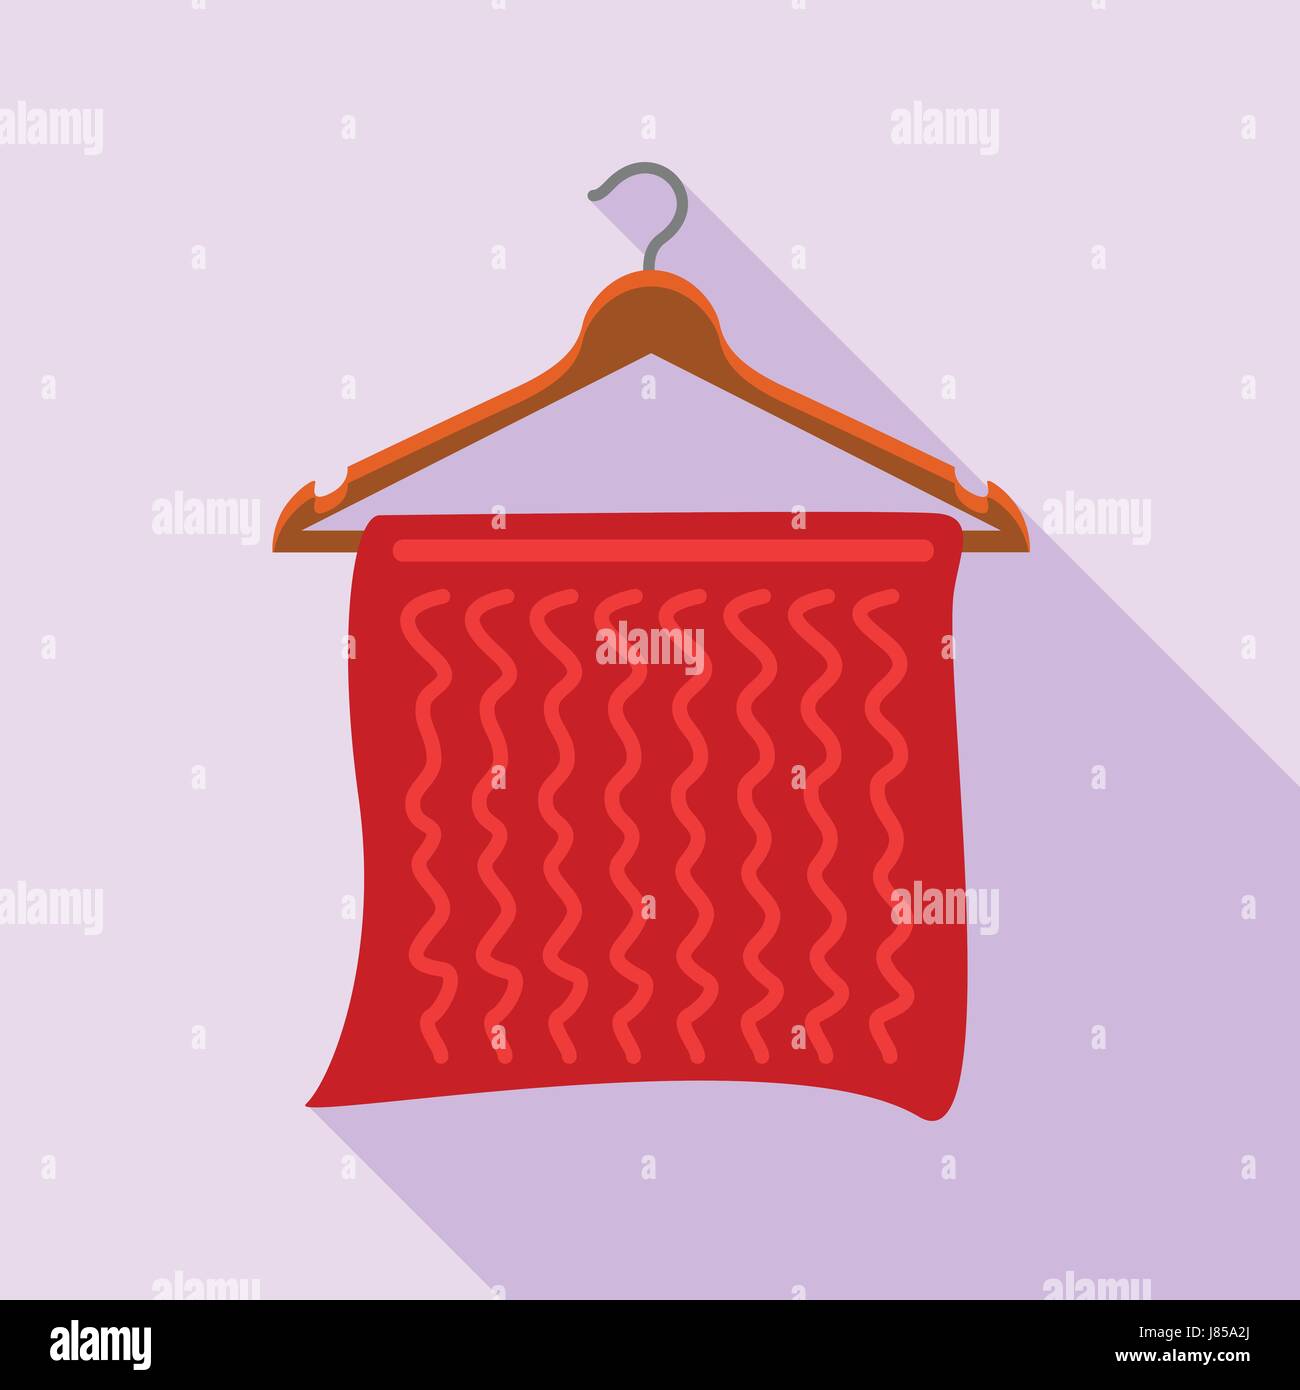 Red towel on coat hanger icon, flat style Stock Vector